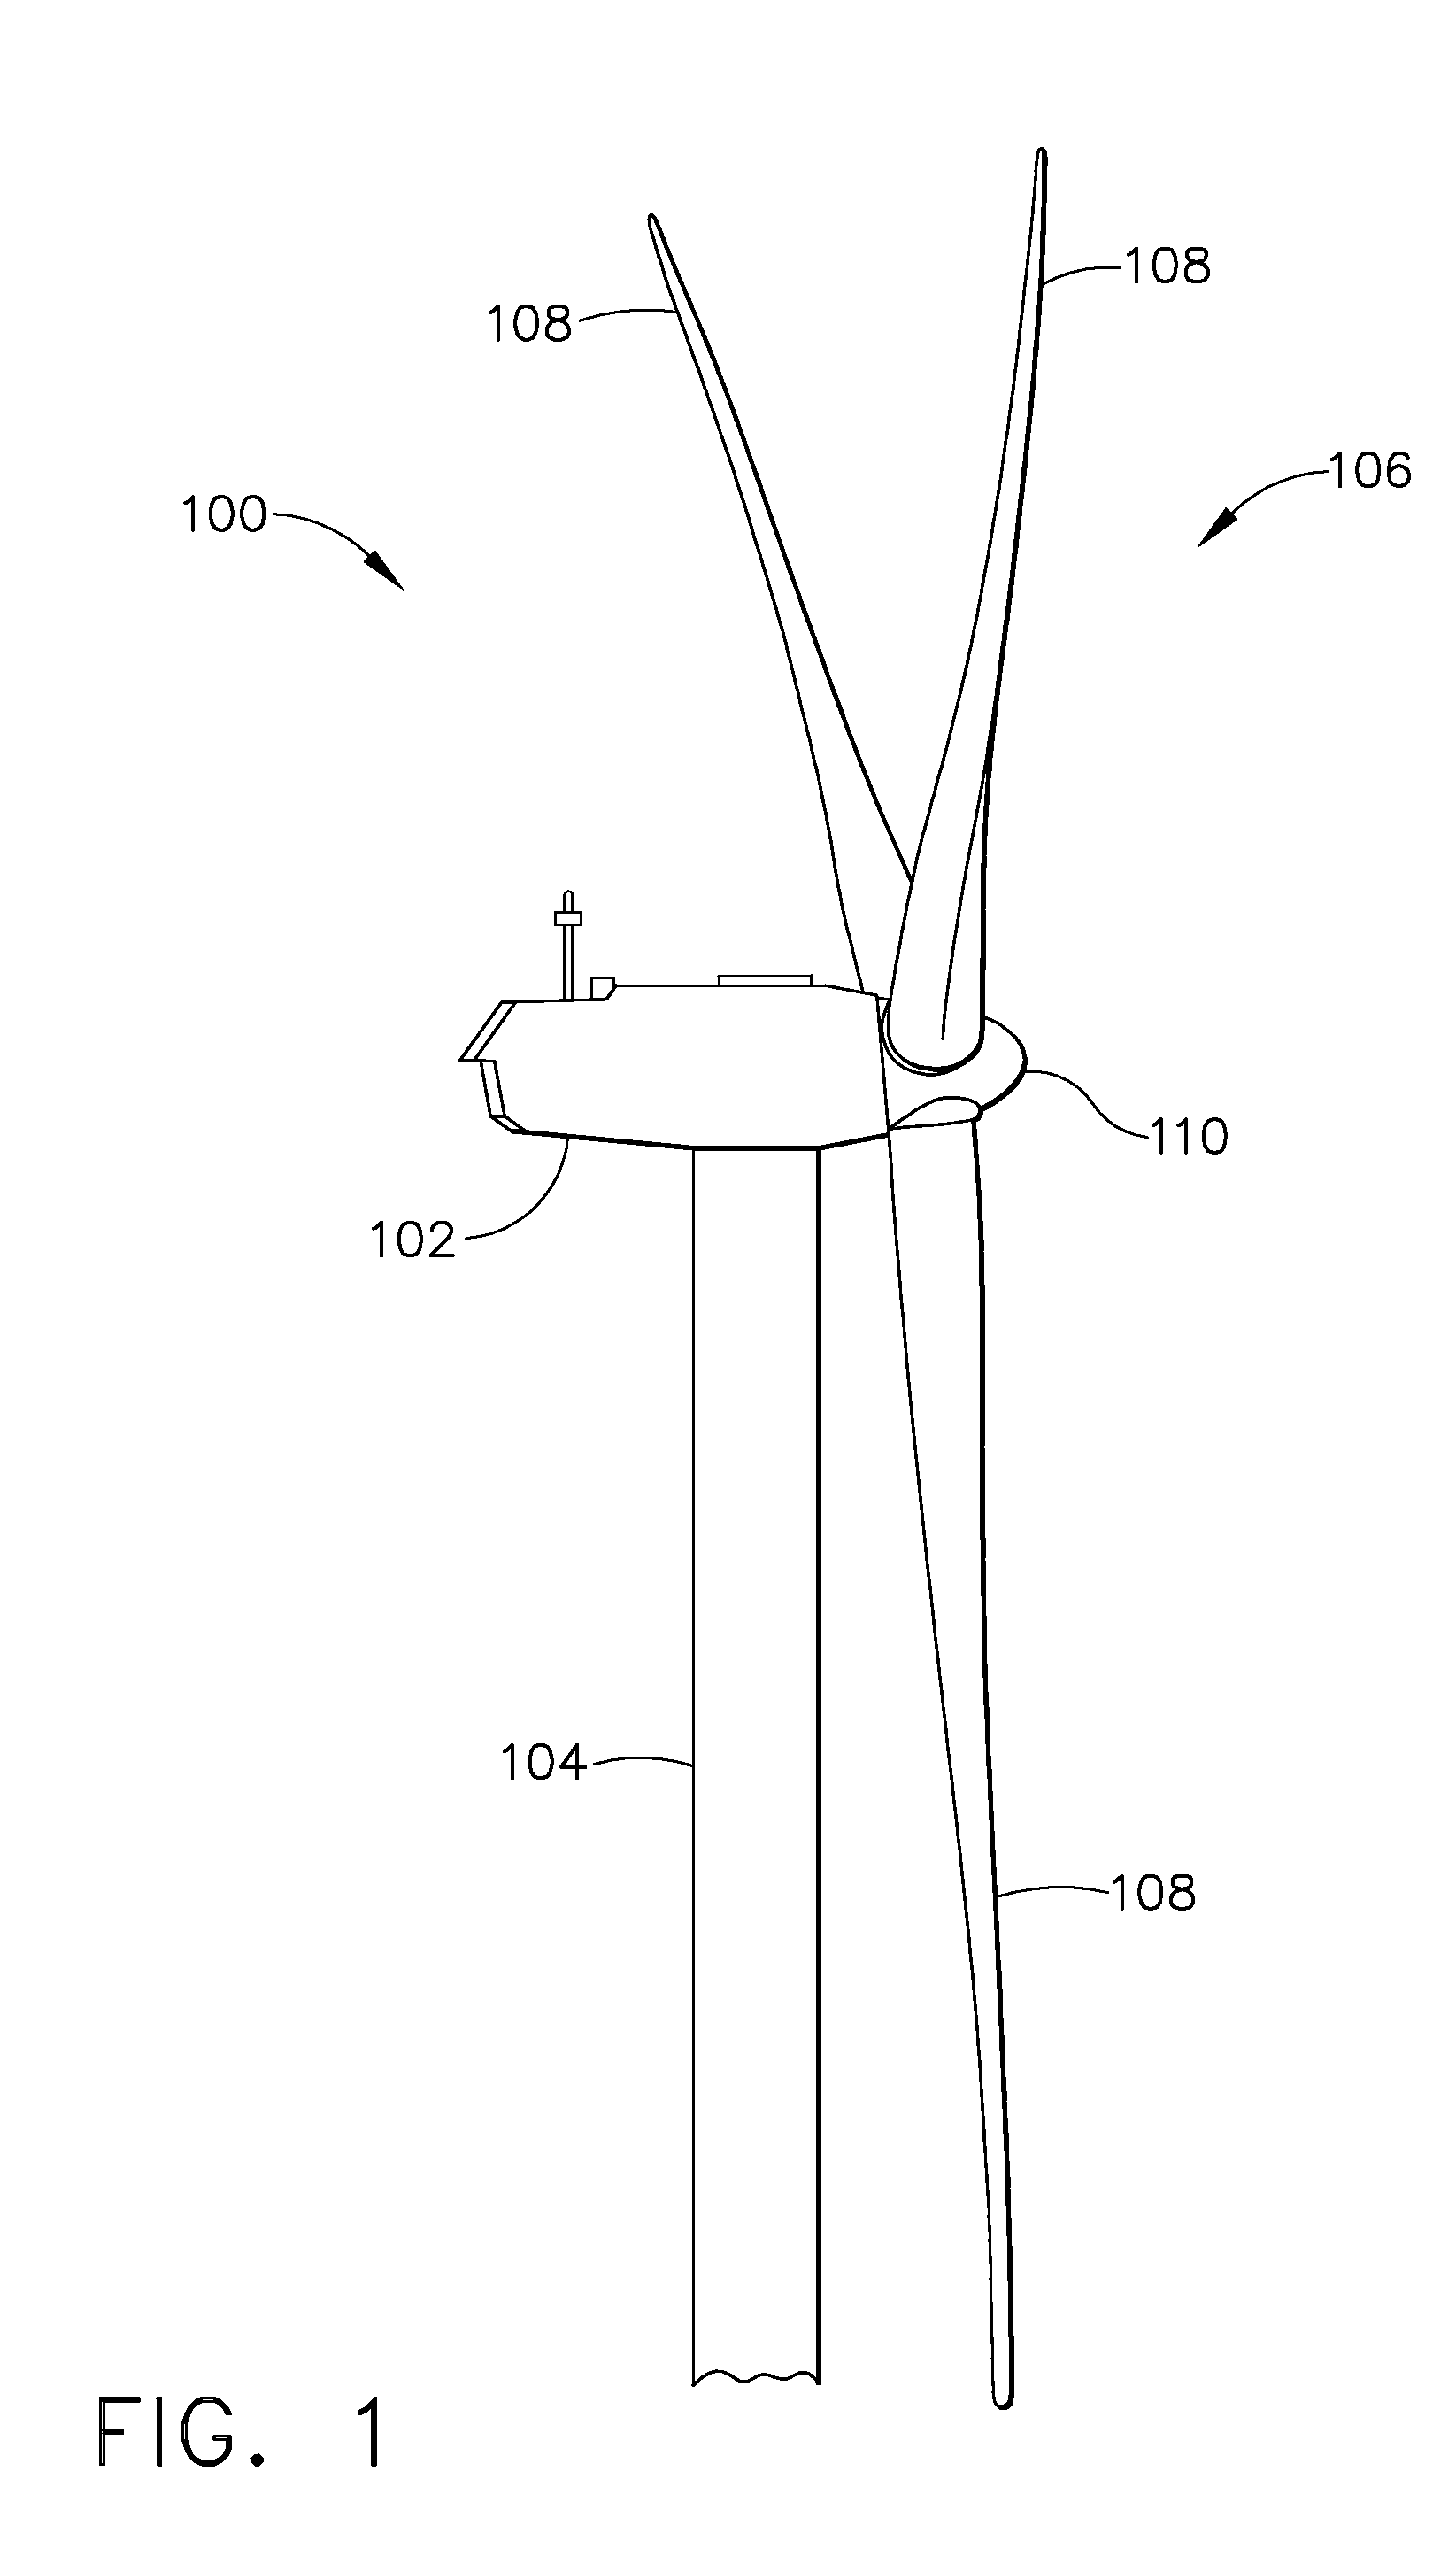 Independent sensing system for wind turbines